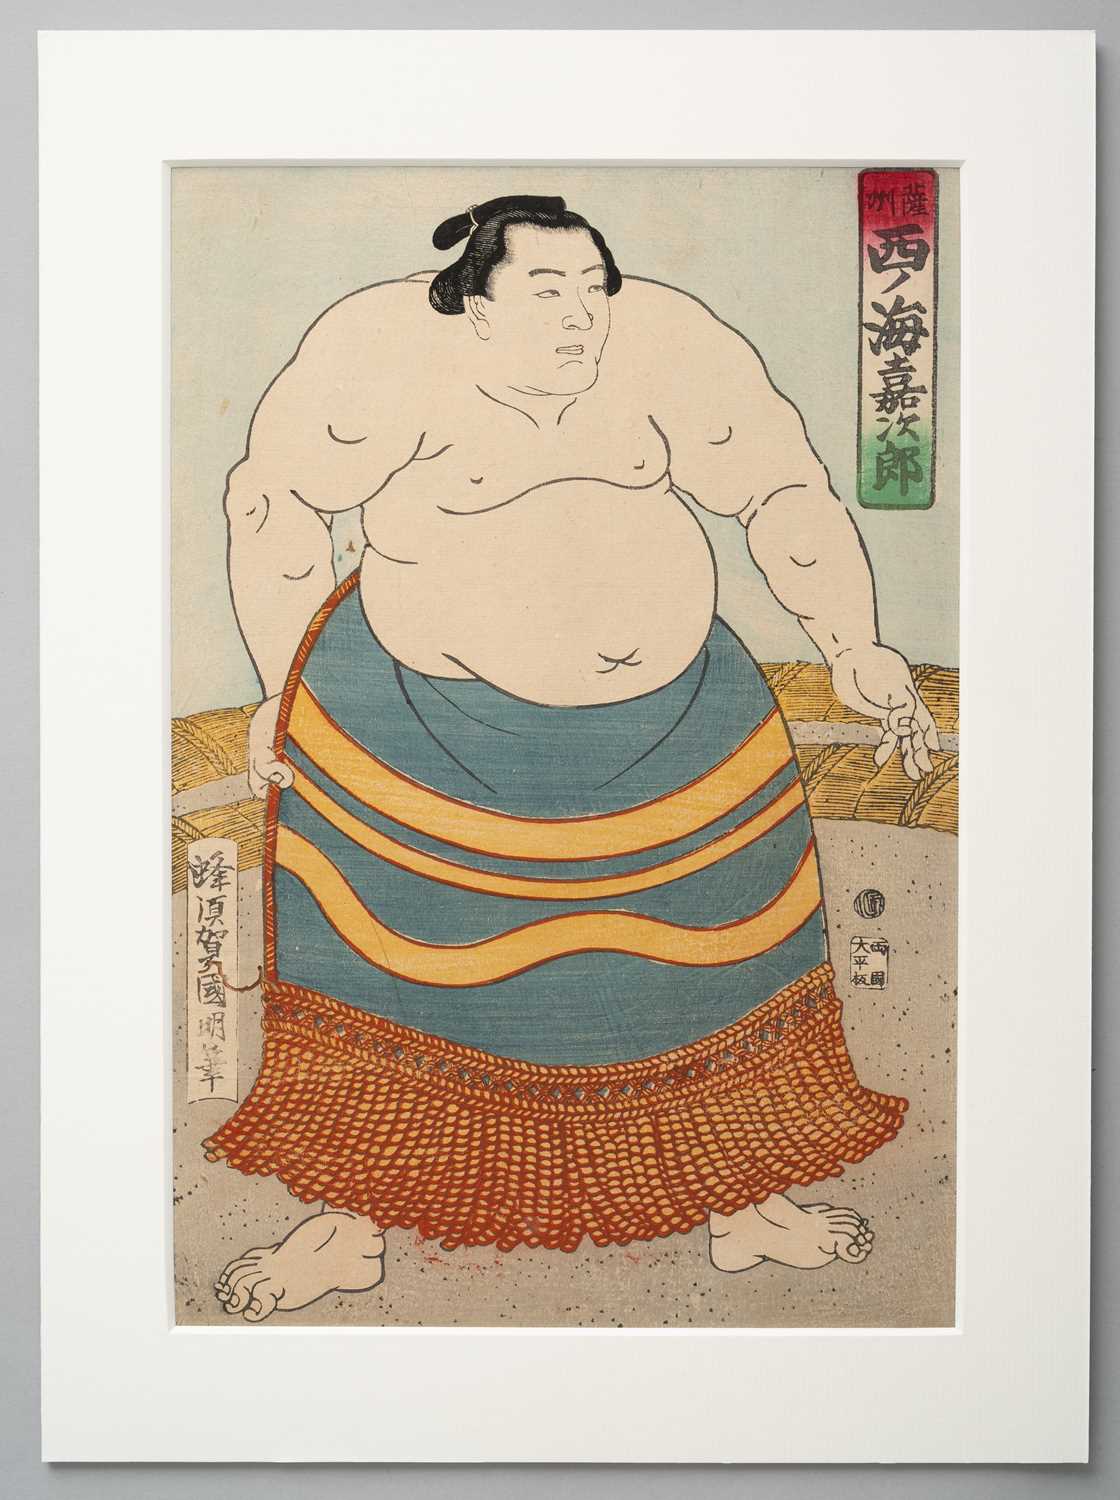 NO RESERVE UNIDENTIFIED ARTISTS SUMO-E (PORTRAITS OF SUMO WRESTLERS) EDO OR MEIJI, 19TH CENTURY A - Image 2 of 9